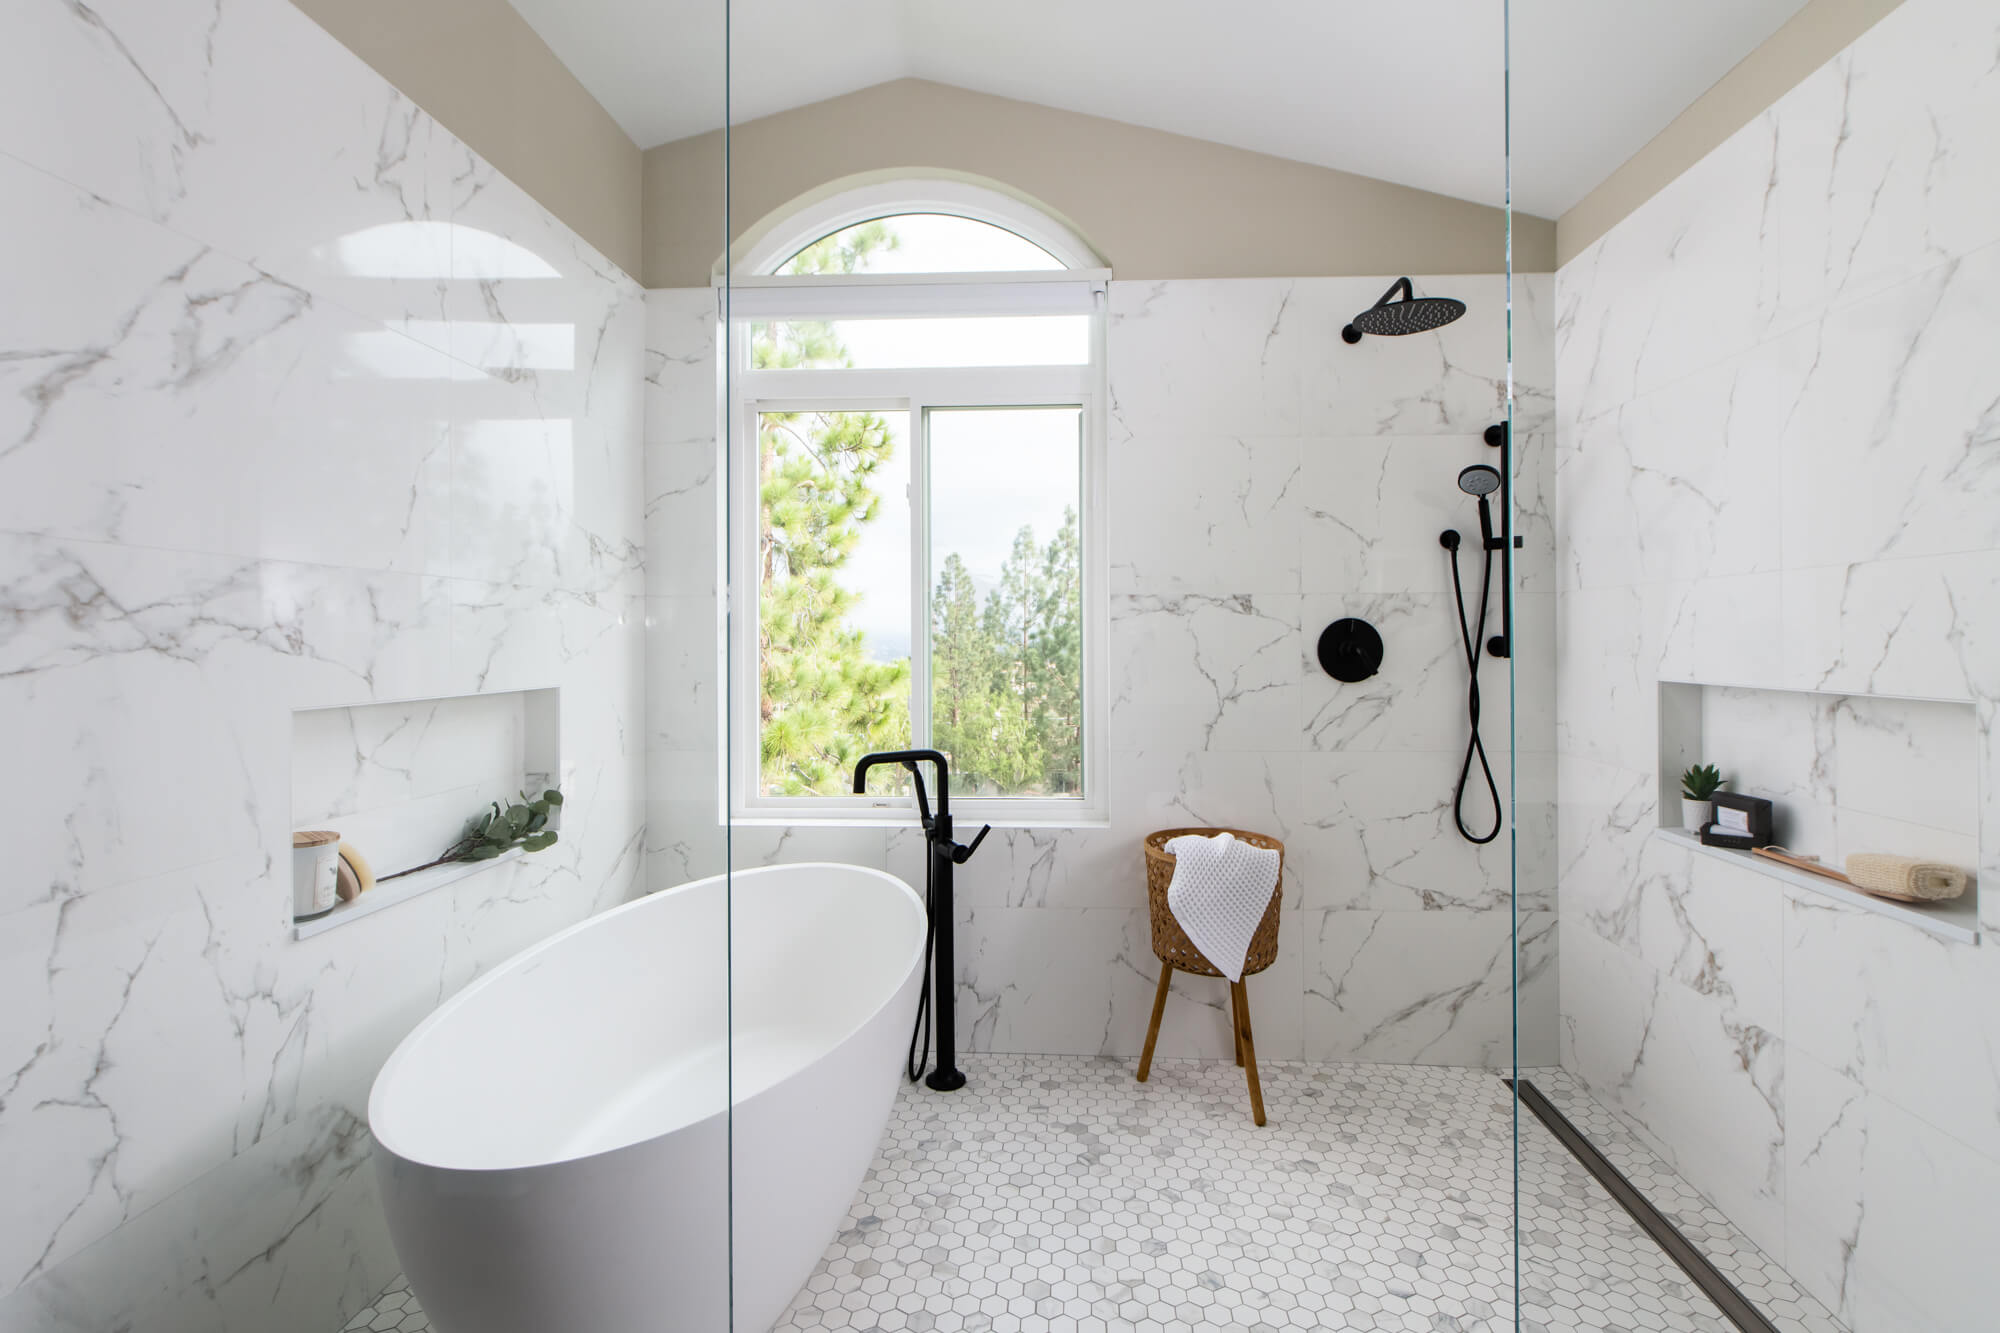 34 Luxurious Corner Shower Ideas to Install in Your Bathroom